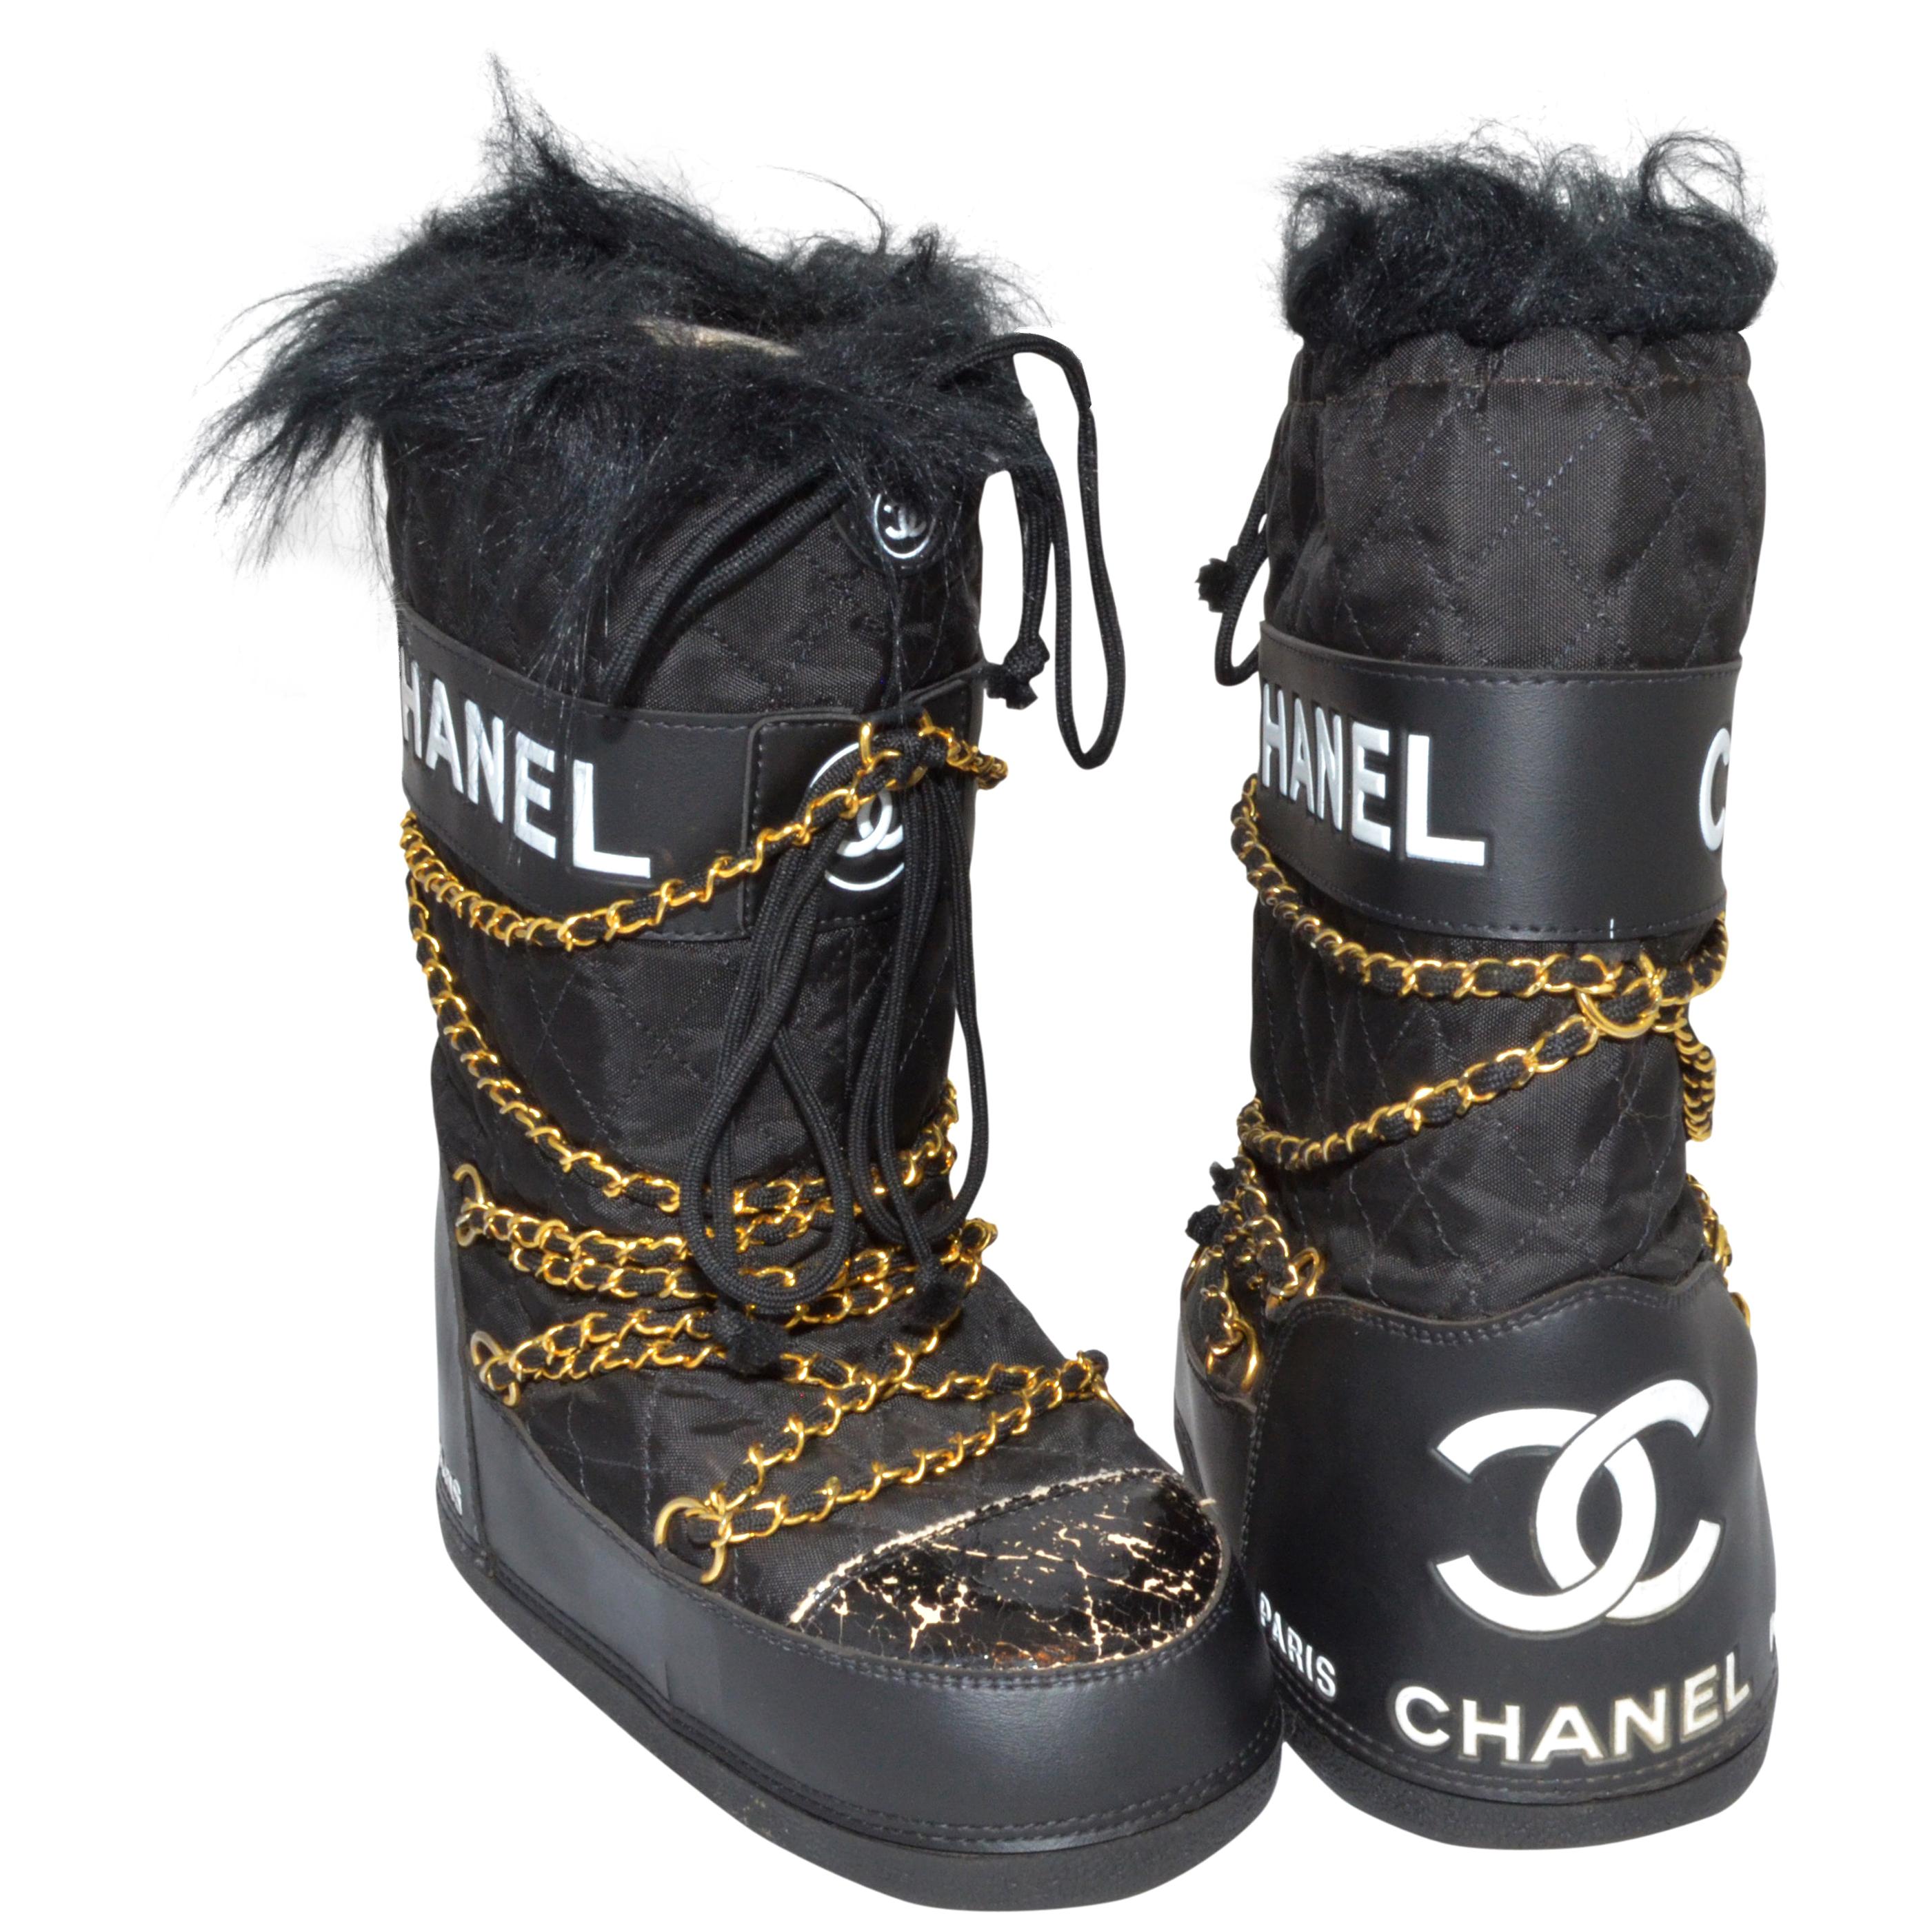 Chanel Moon Boots - For Sale on 1stDibs  moon boot chanel, moonboots chanel,  chanel moon boots for sale